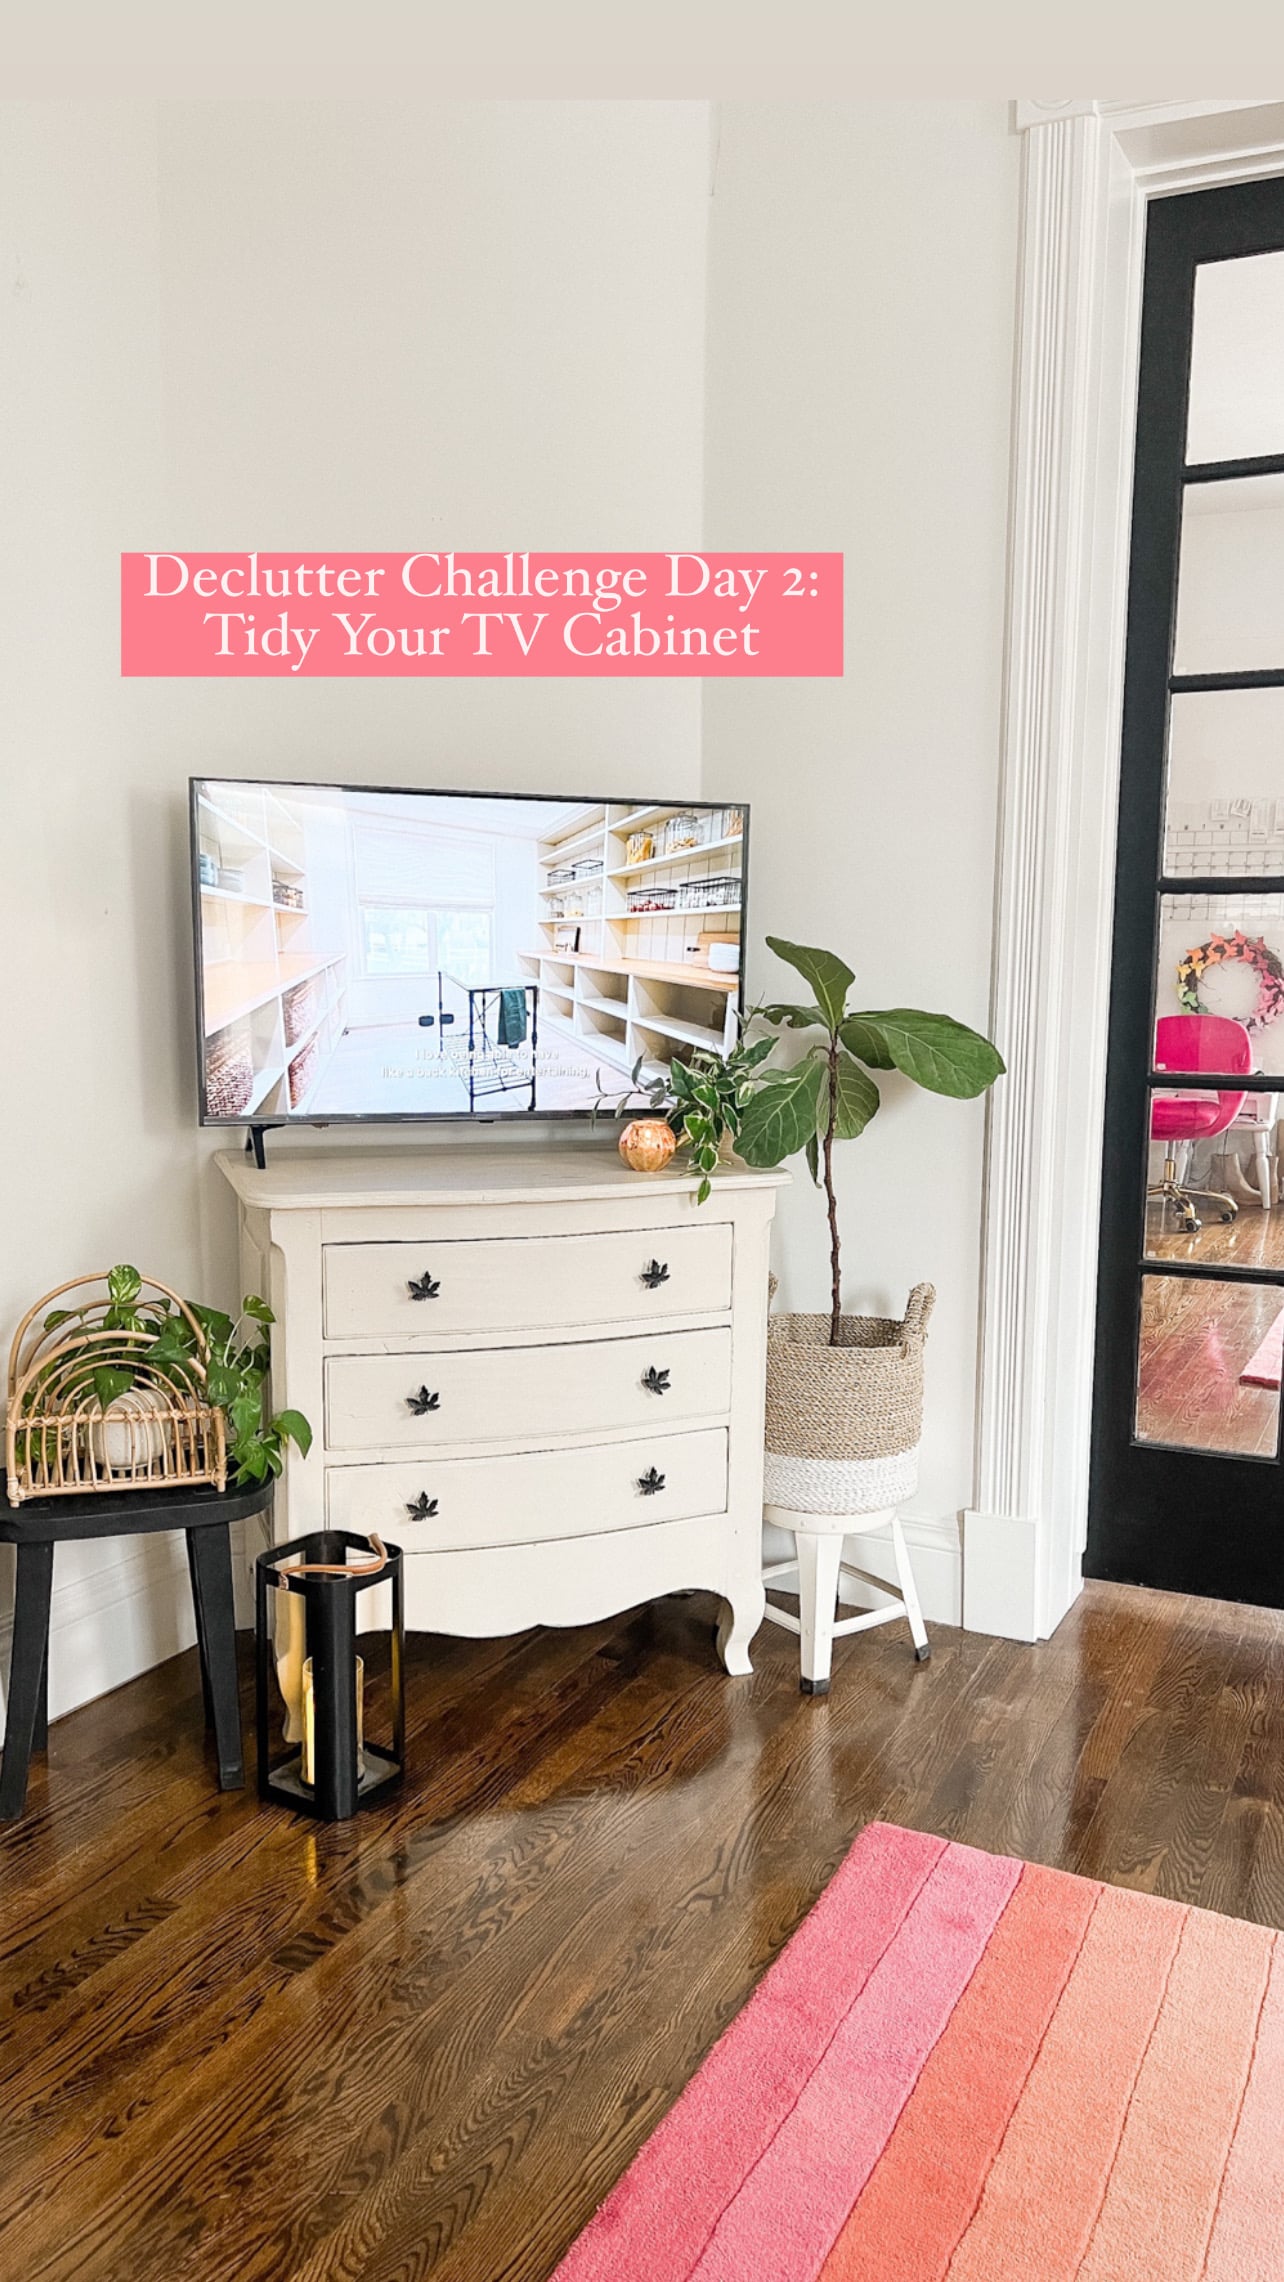 Declutter Challenge - tidy tv cabinet. We cleaned out our tv/media cabinets and it felt so nice. Each day we take 1 area and clean it and by the end of January we have a tidy clean home! 